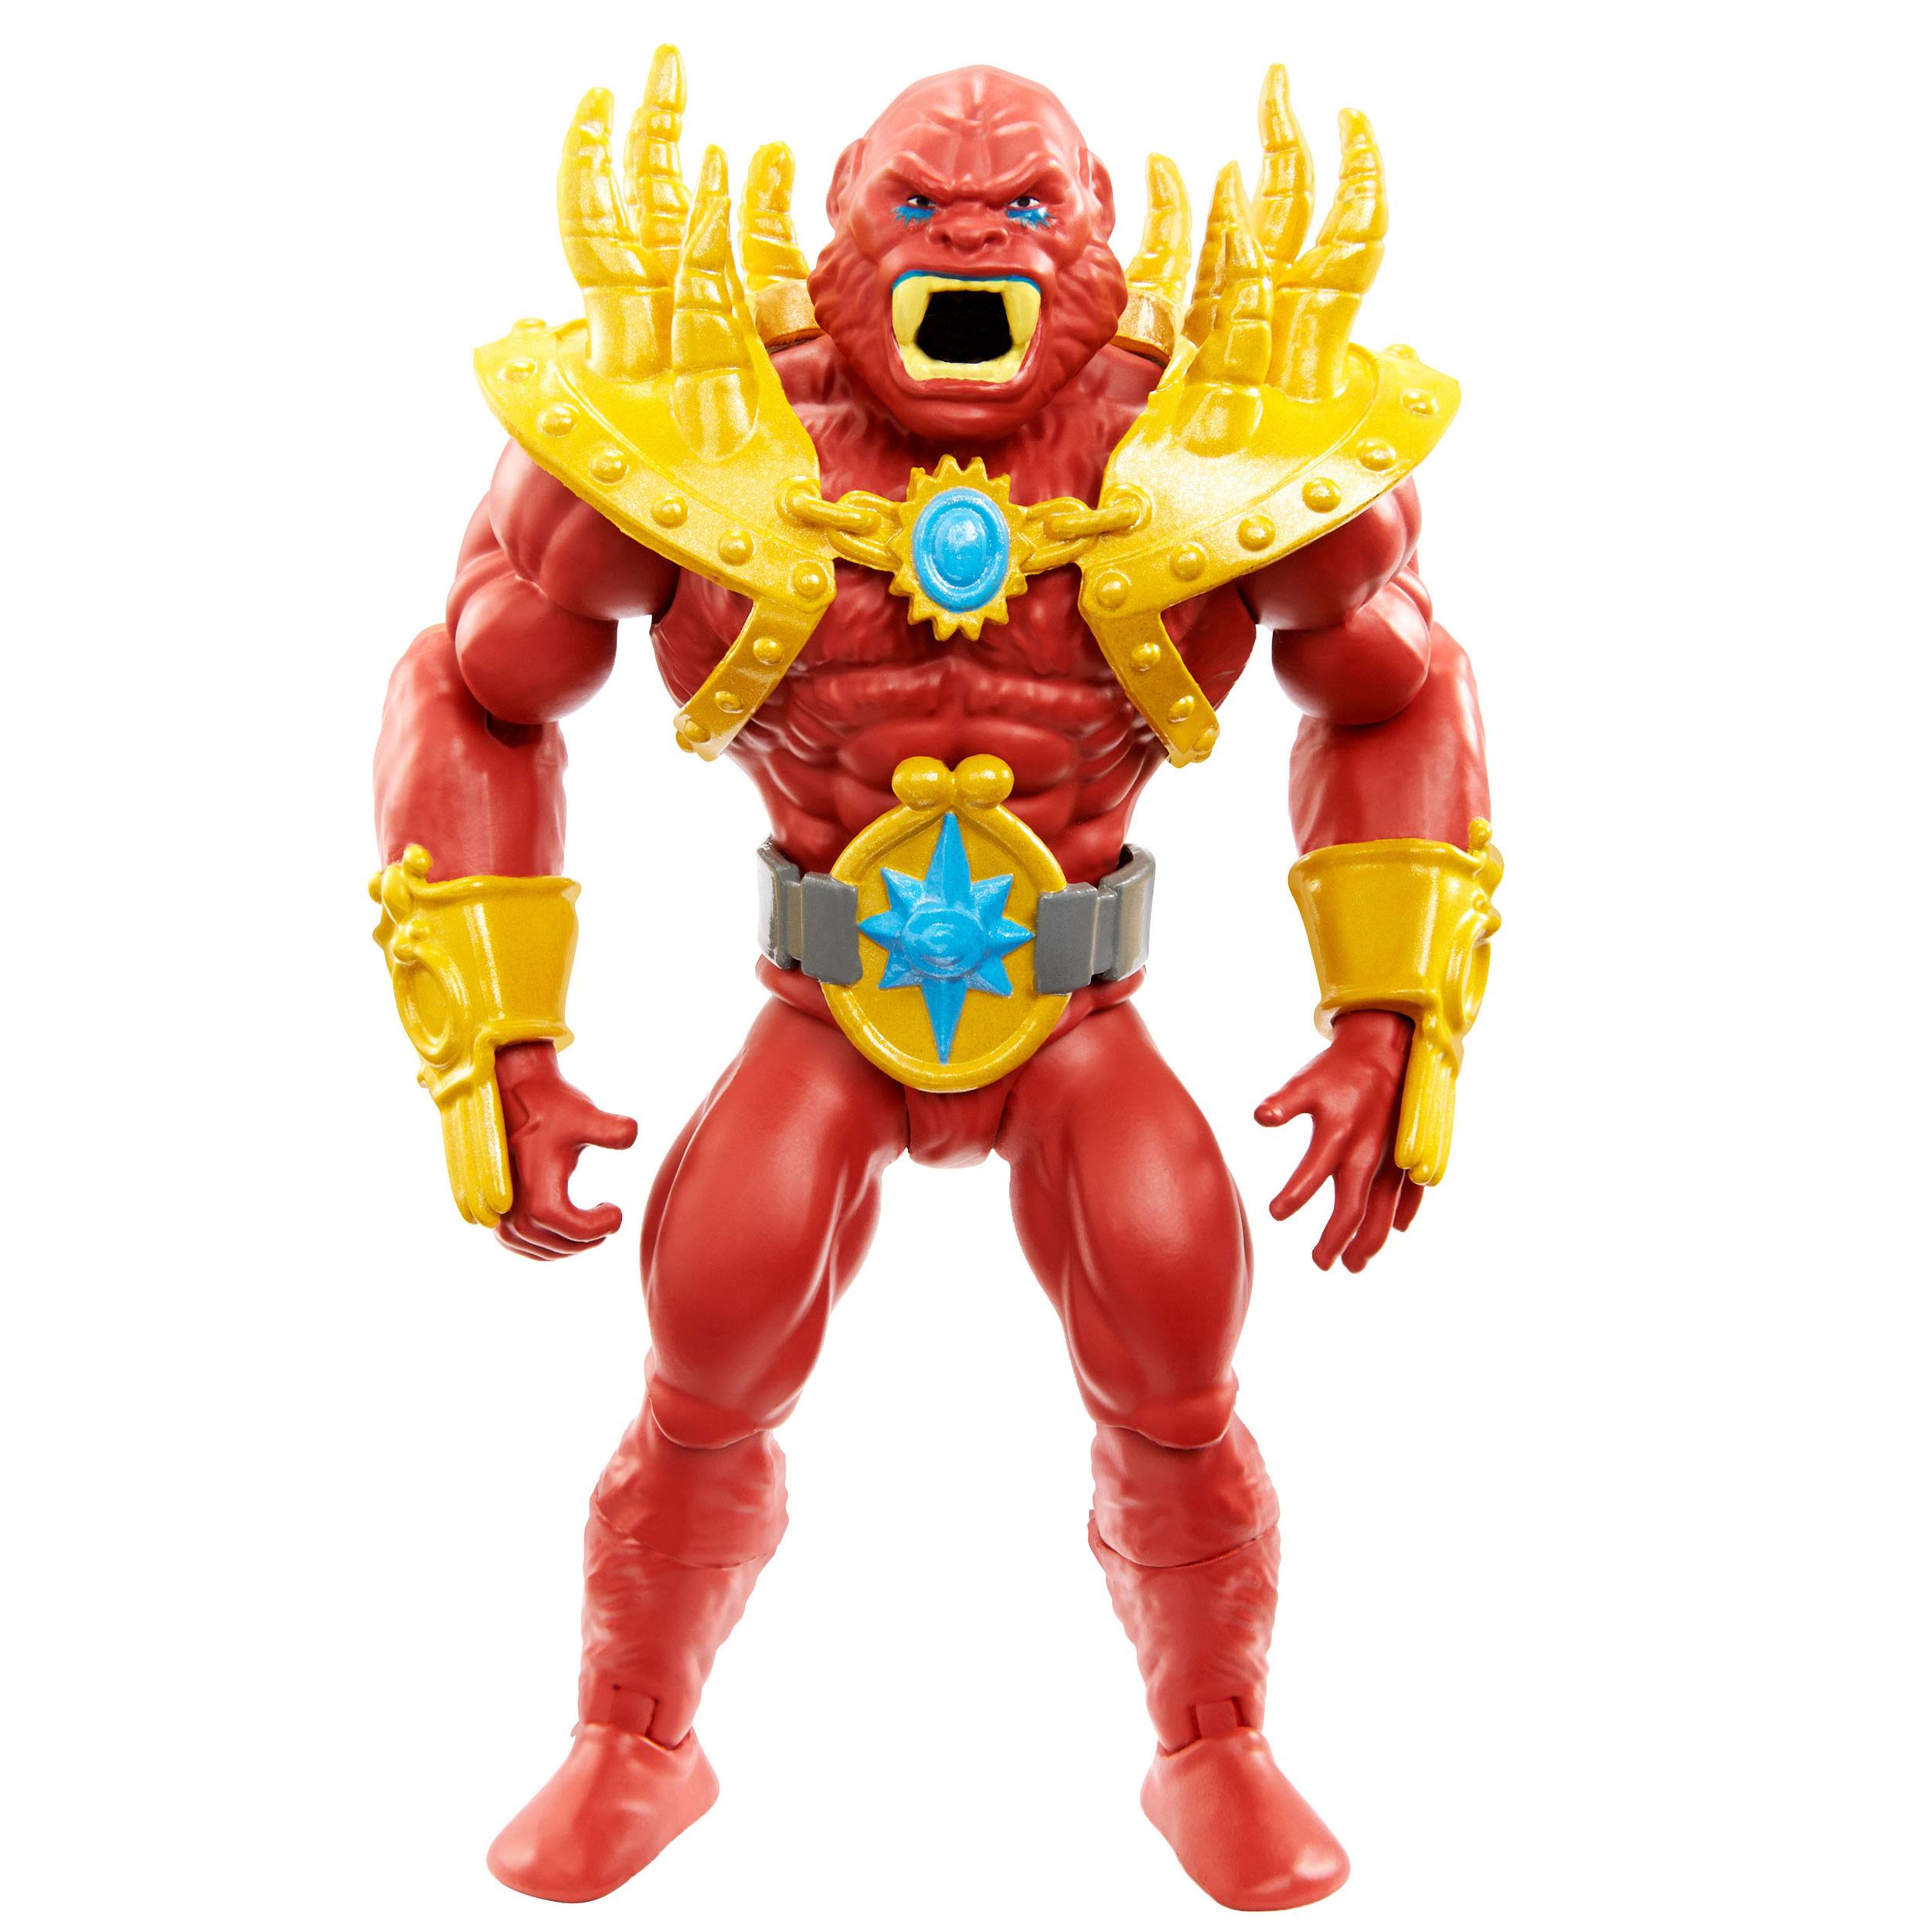 Masters of the Universe Origins Actionfigur 2021 Lords of Power Beast Man 14 cm MATTGYY26 0887961982794